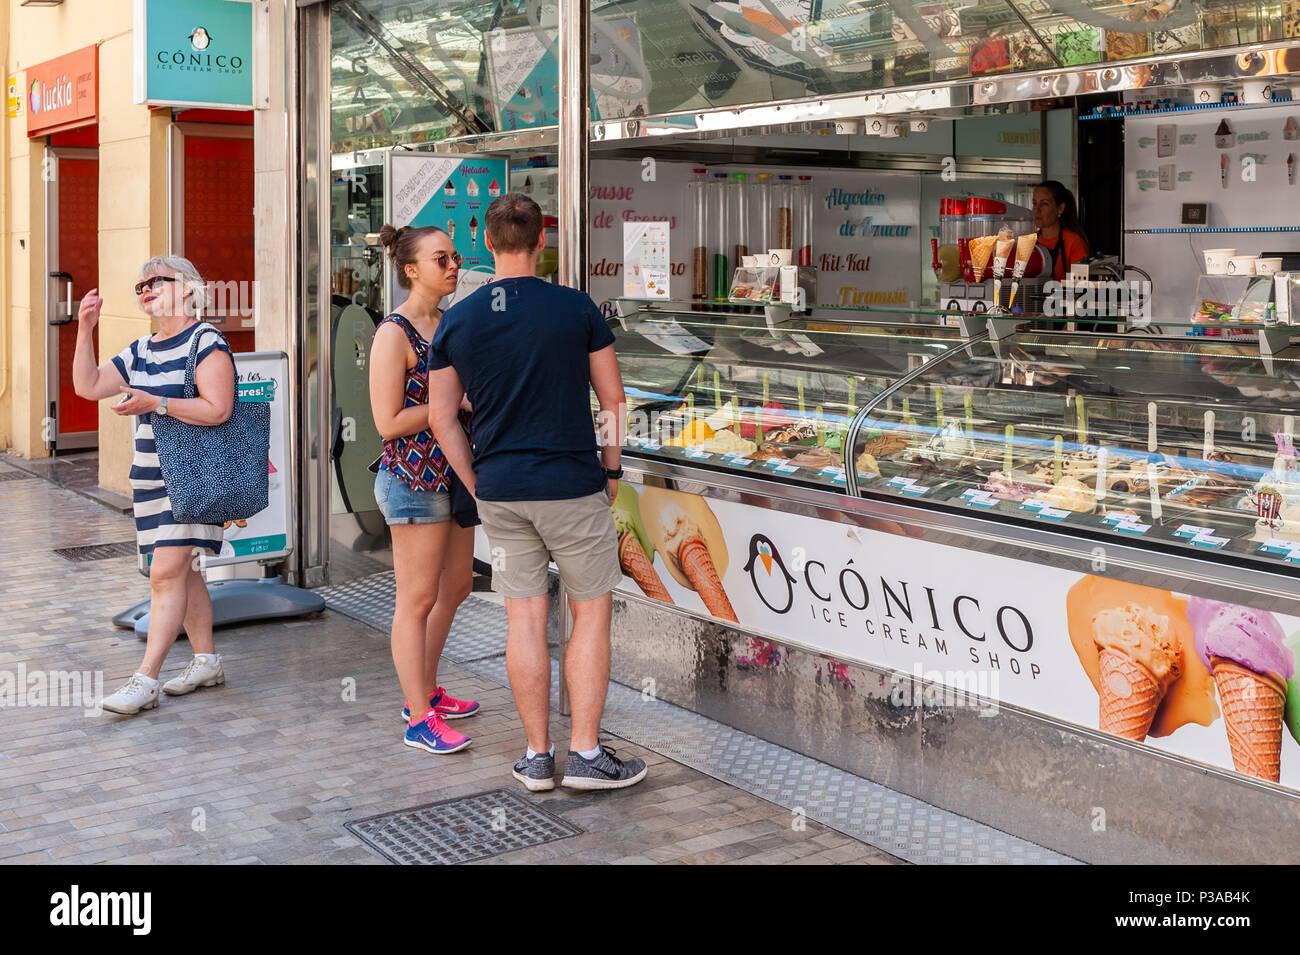 People buying ice cream from Conico Ice Cream shop in the city centre, Malaga, Spain. Stock Photo